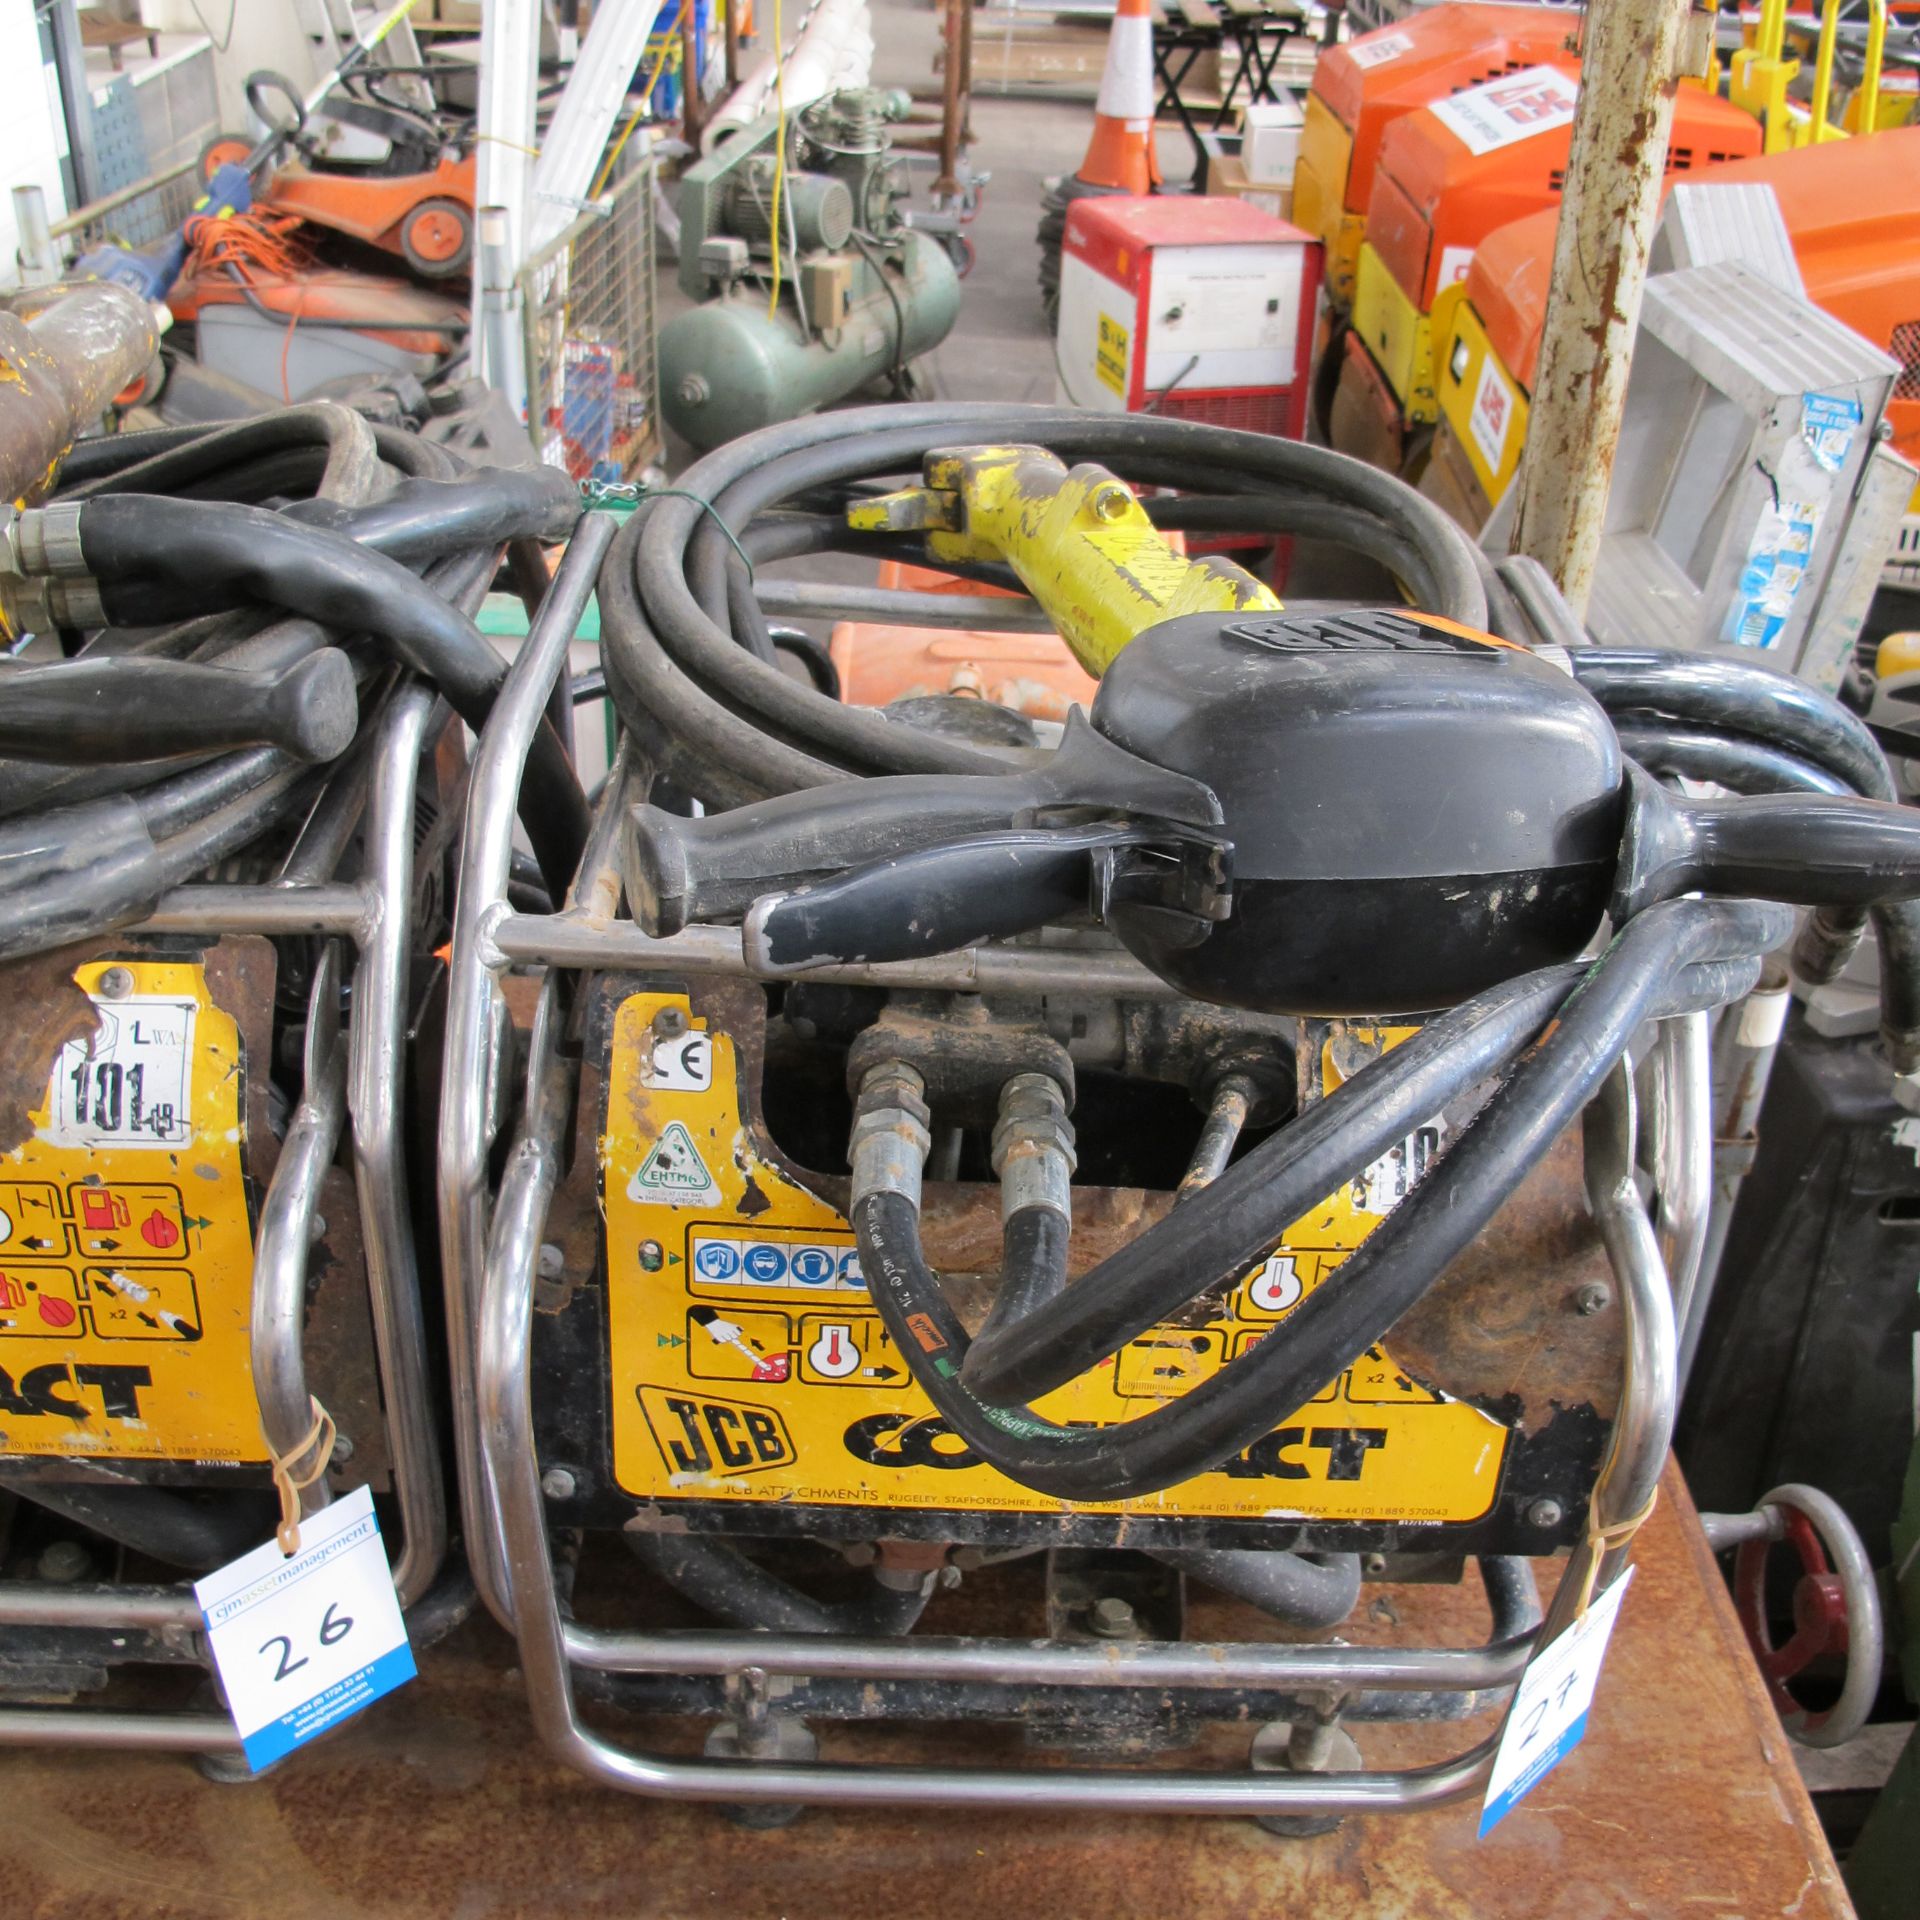 * JCB Compact Portable Petrol Driven Jack Hammer Power Pack c/w Hose & Jack Hammer; driven by